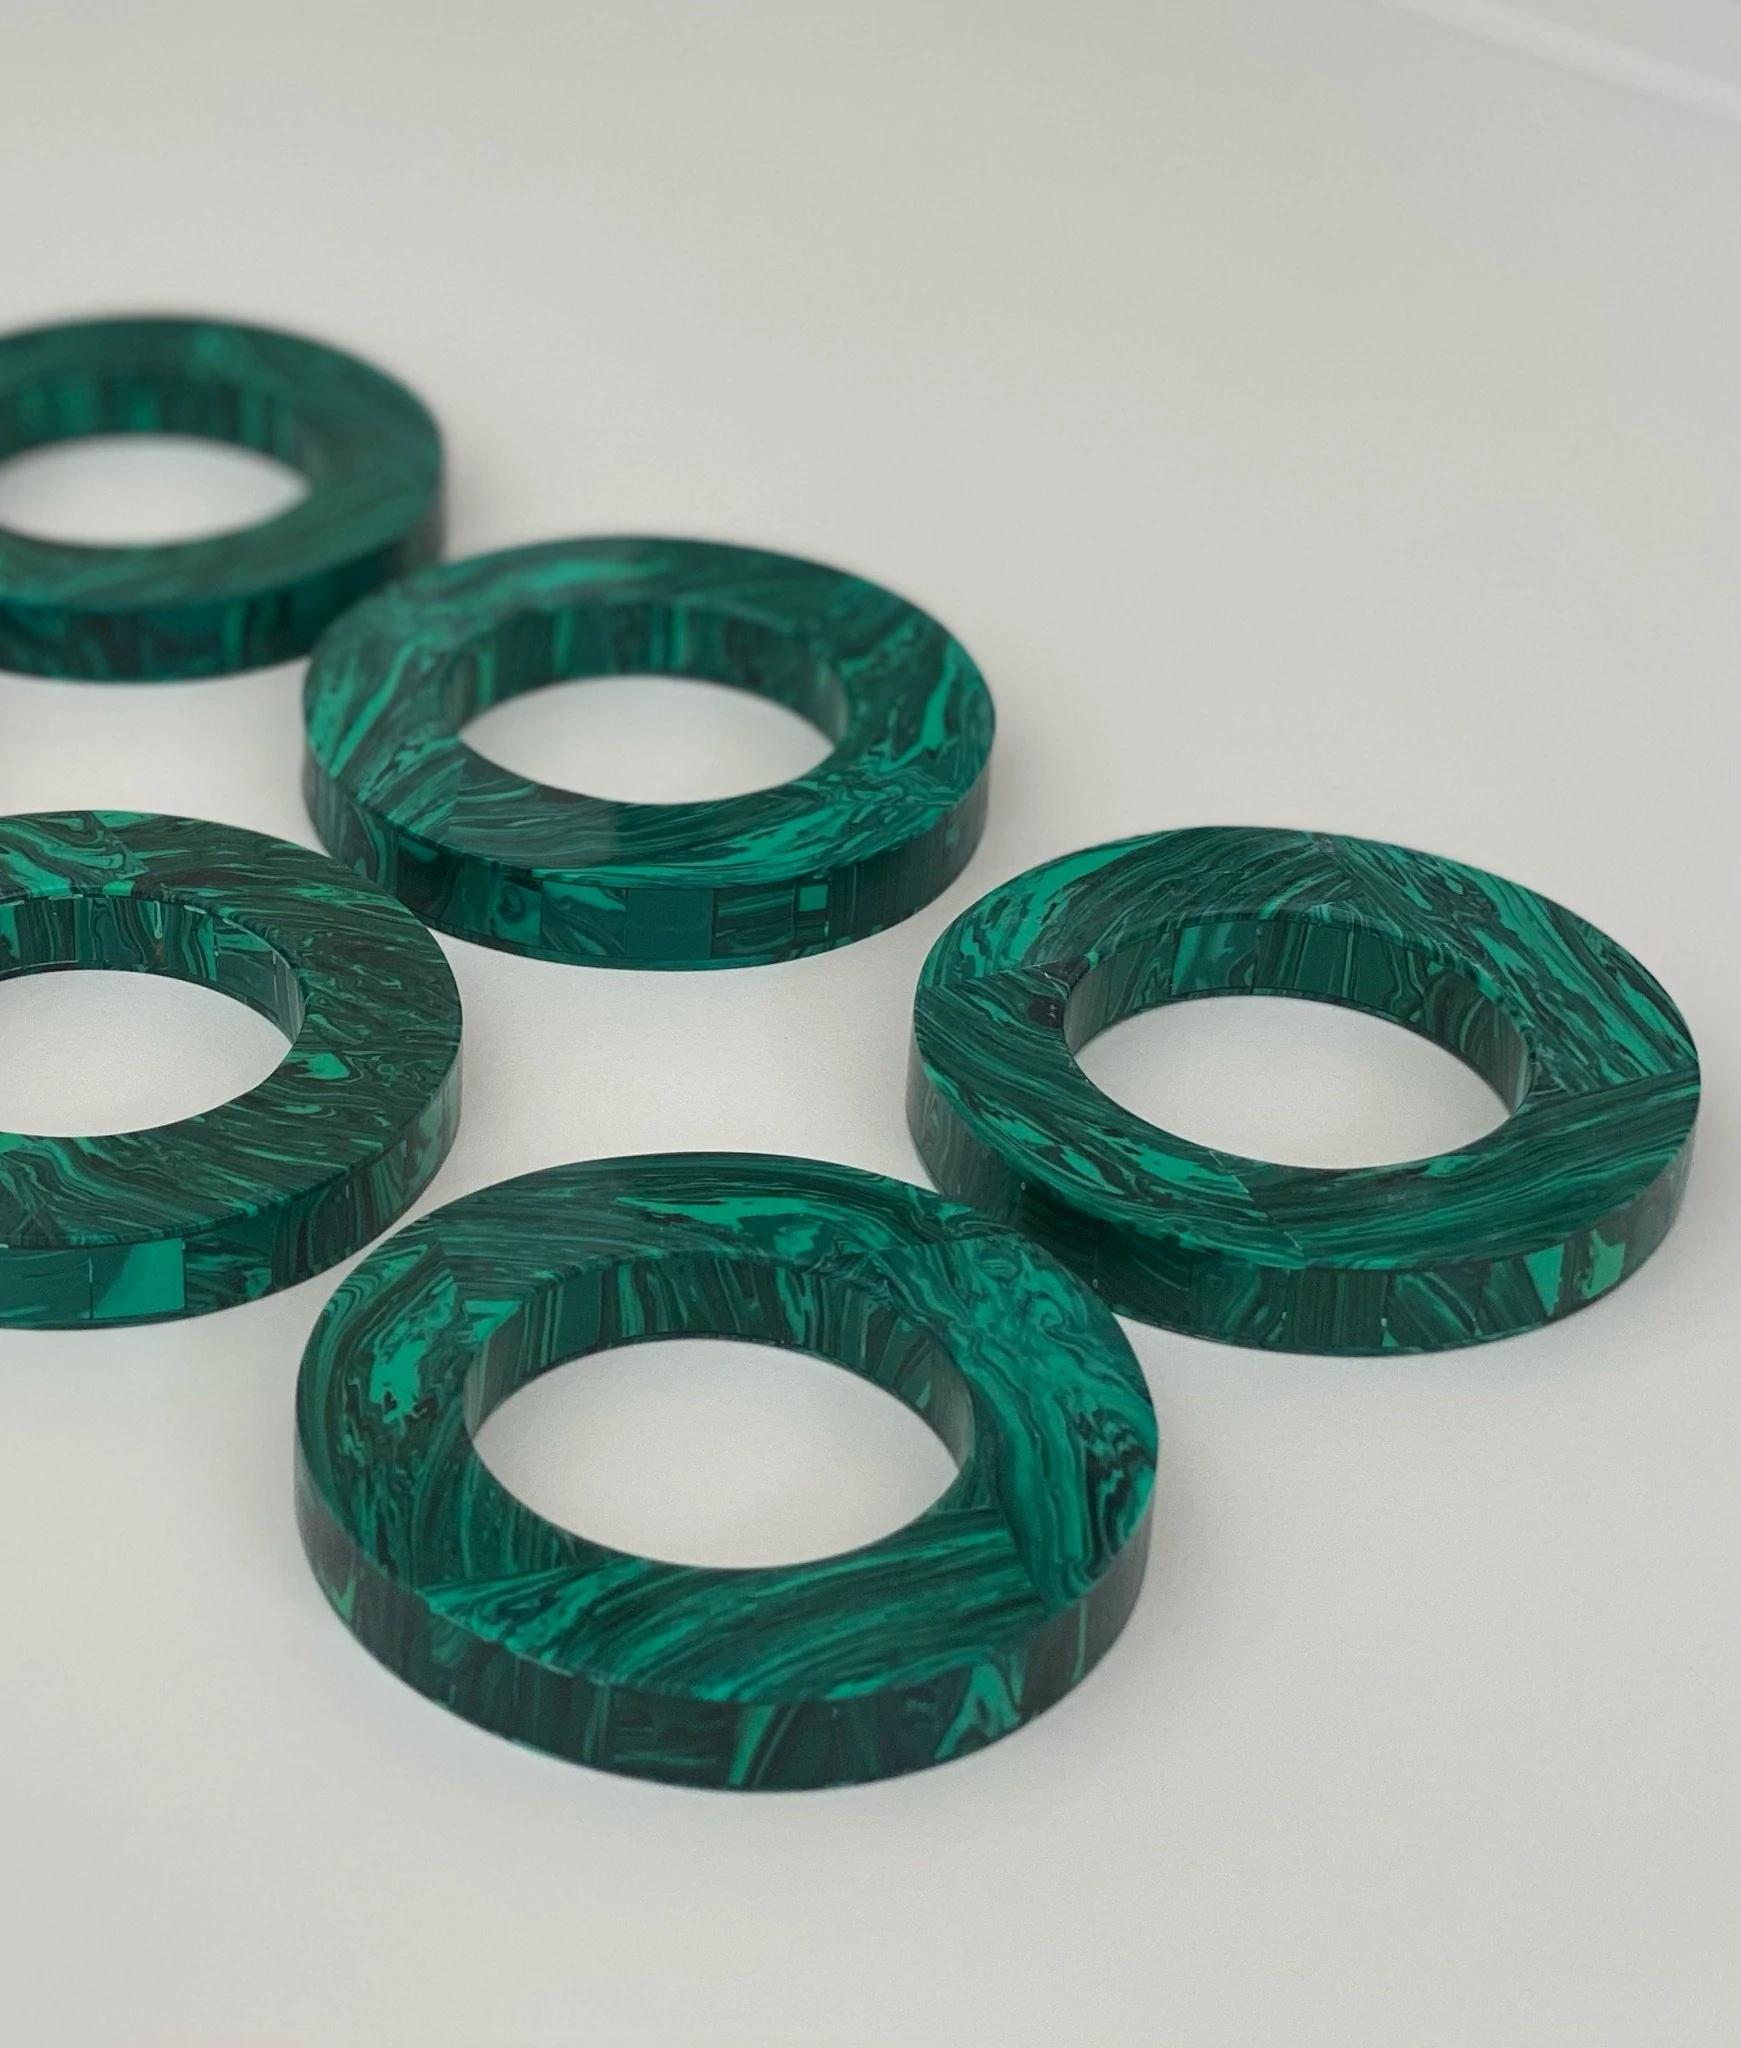 Set of 6 round malachite napkin rings by Marcela Cure
Dimensions: W 7 x D 7 x H 1 cm
Materials: Malachite

Our luxurious Malachite Napkin Rings are completely made with natural malachite. They are the perfect finishing touch for a beautiful